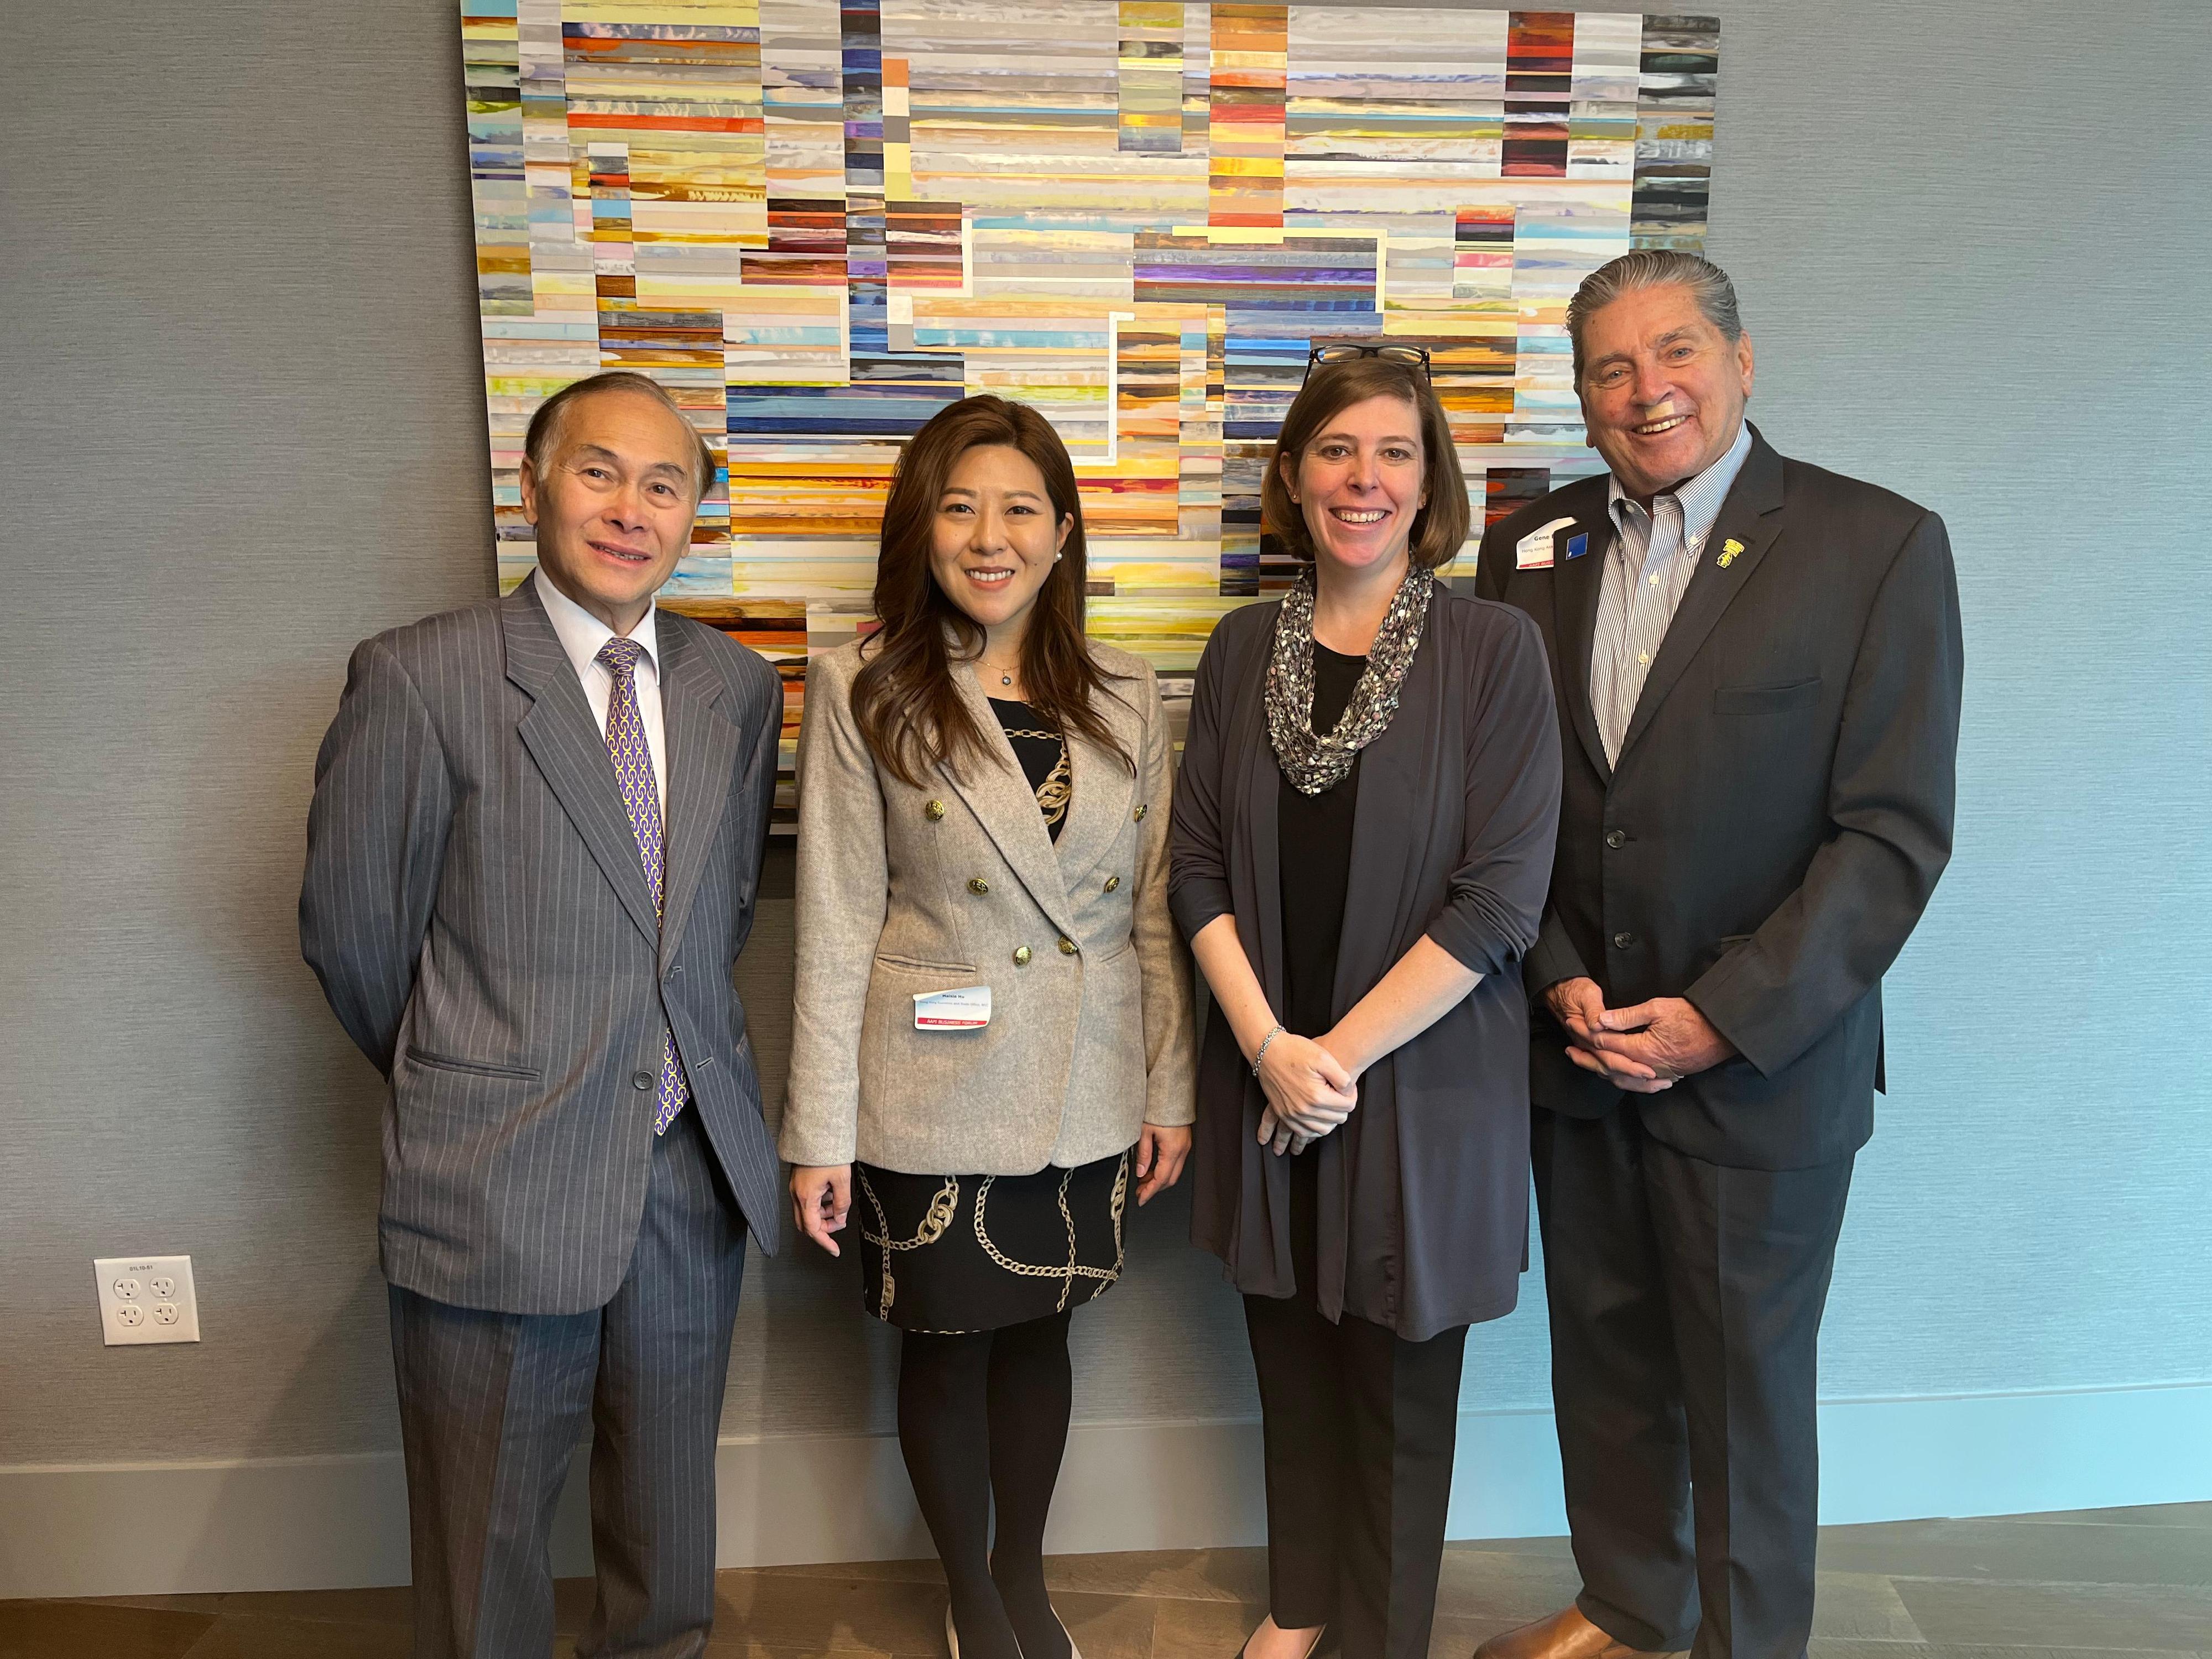 The Director of the Hong Kong Economic and Trade Office in New York, Ms Maisie Ho, paid a duty visit to Atlanta, Georgia on November 8 and 9 (Atlanta time), to strengthen ties with the local government and business interlocutors. Photo shows (from left) the President of the Hong Kong Association of Atlanta (HKAA), Mr Henry Yu; Ms Ho; the Deputy Commissioner for International Trade of the Georgia Department of Economic Development, Ms Mary Waters, and the Senior Consultant of HKAA, Mr Gene Hanratty. 